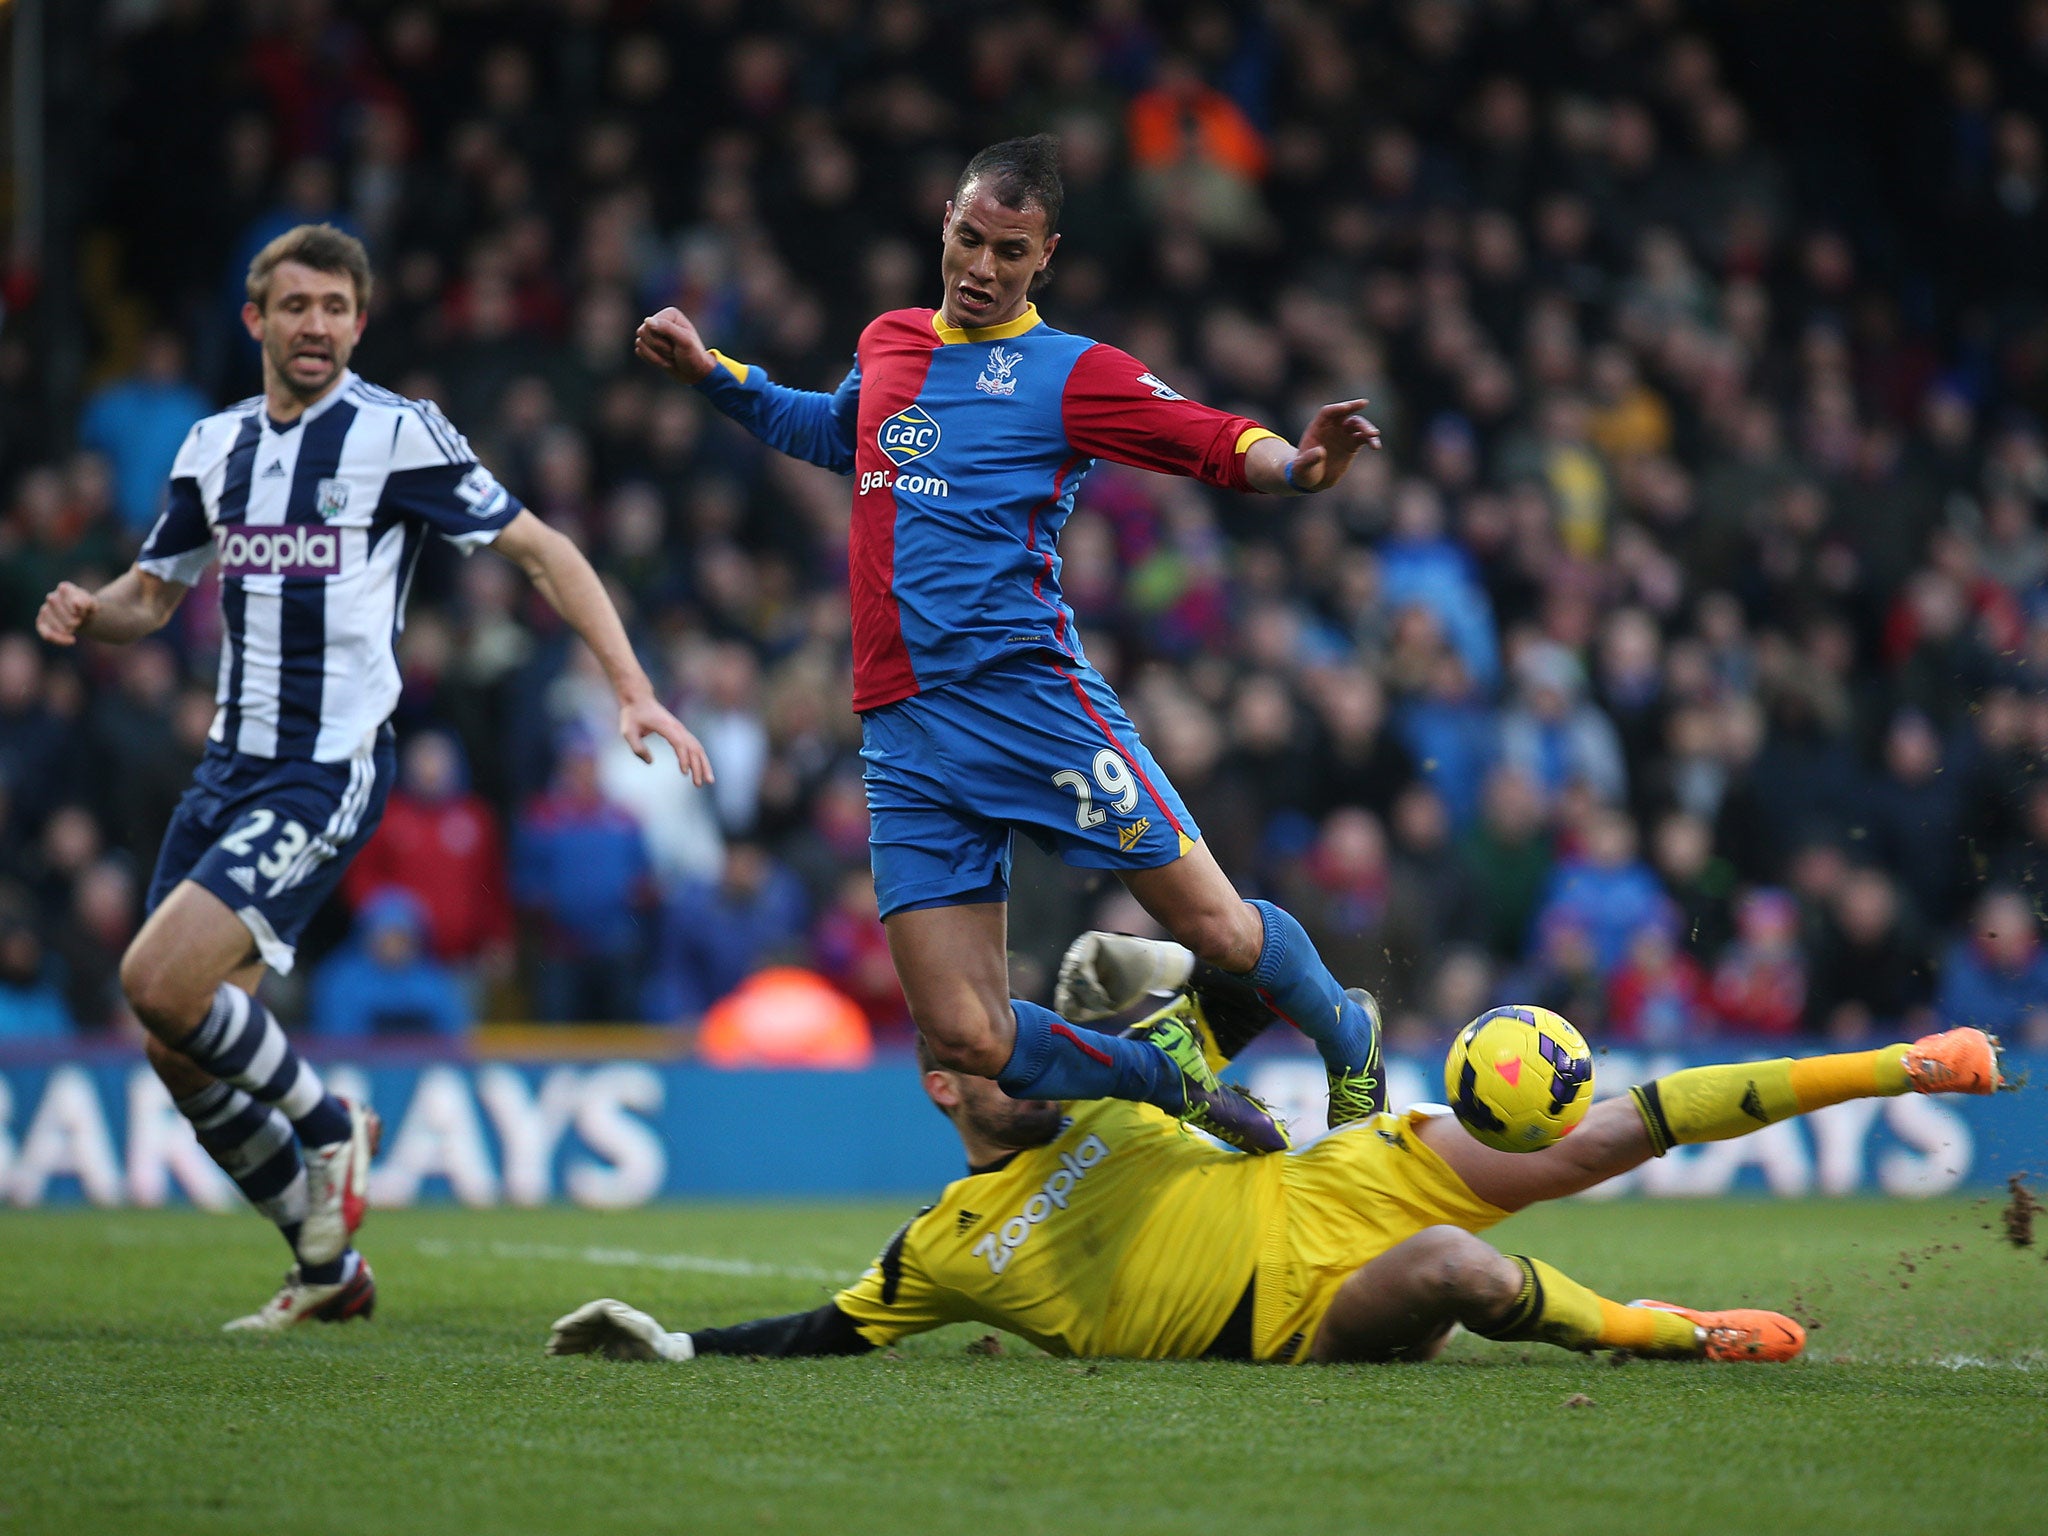 Marouane Chamakh of Palace is fouled by Ben Foster of West Brom